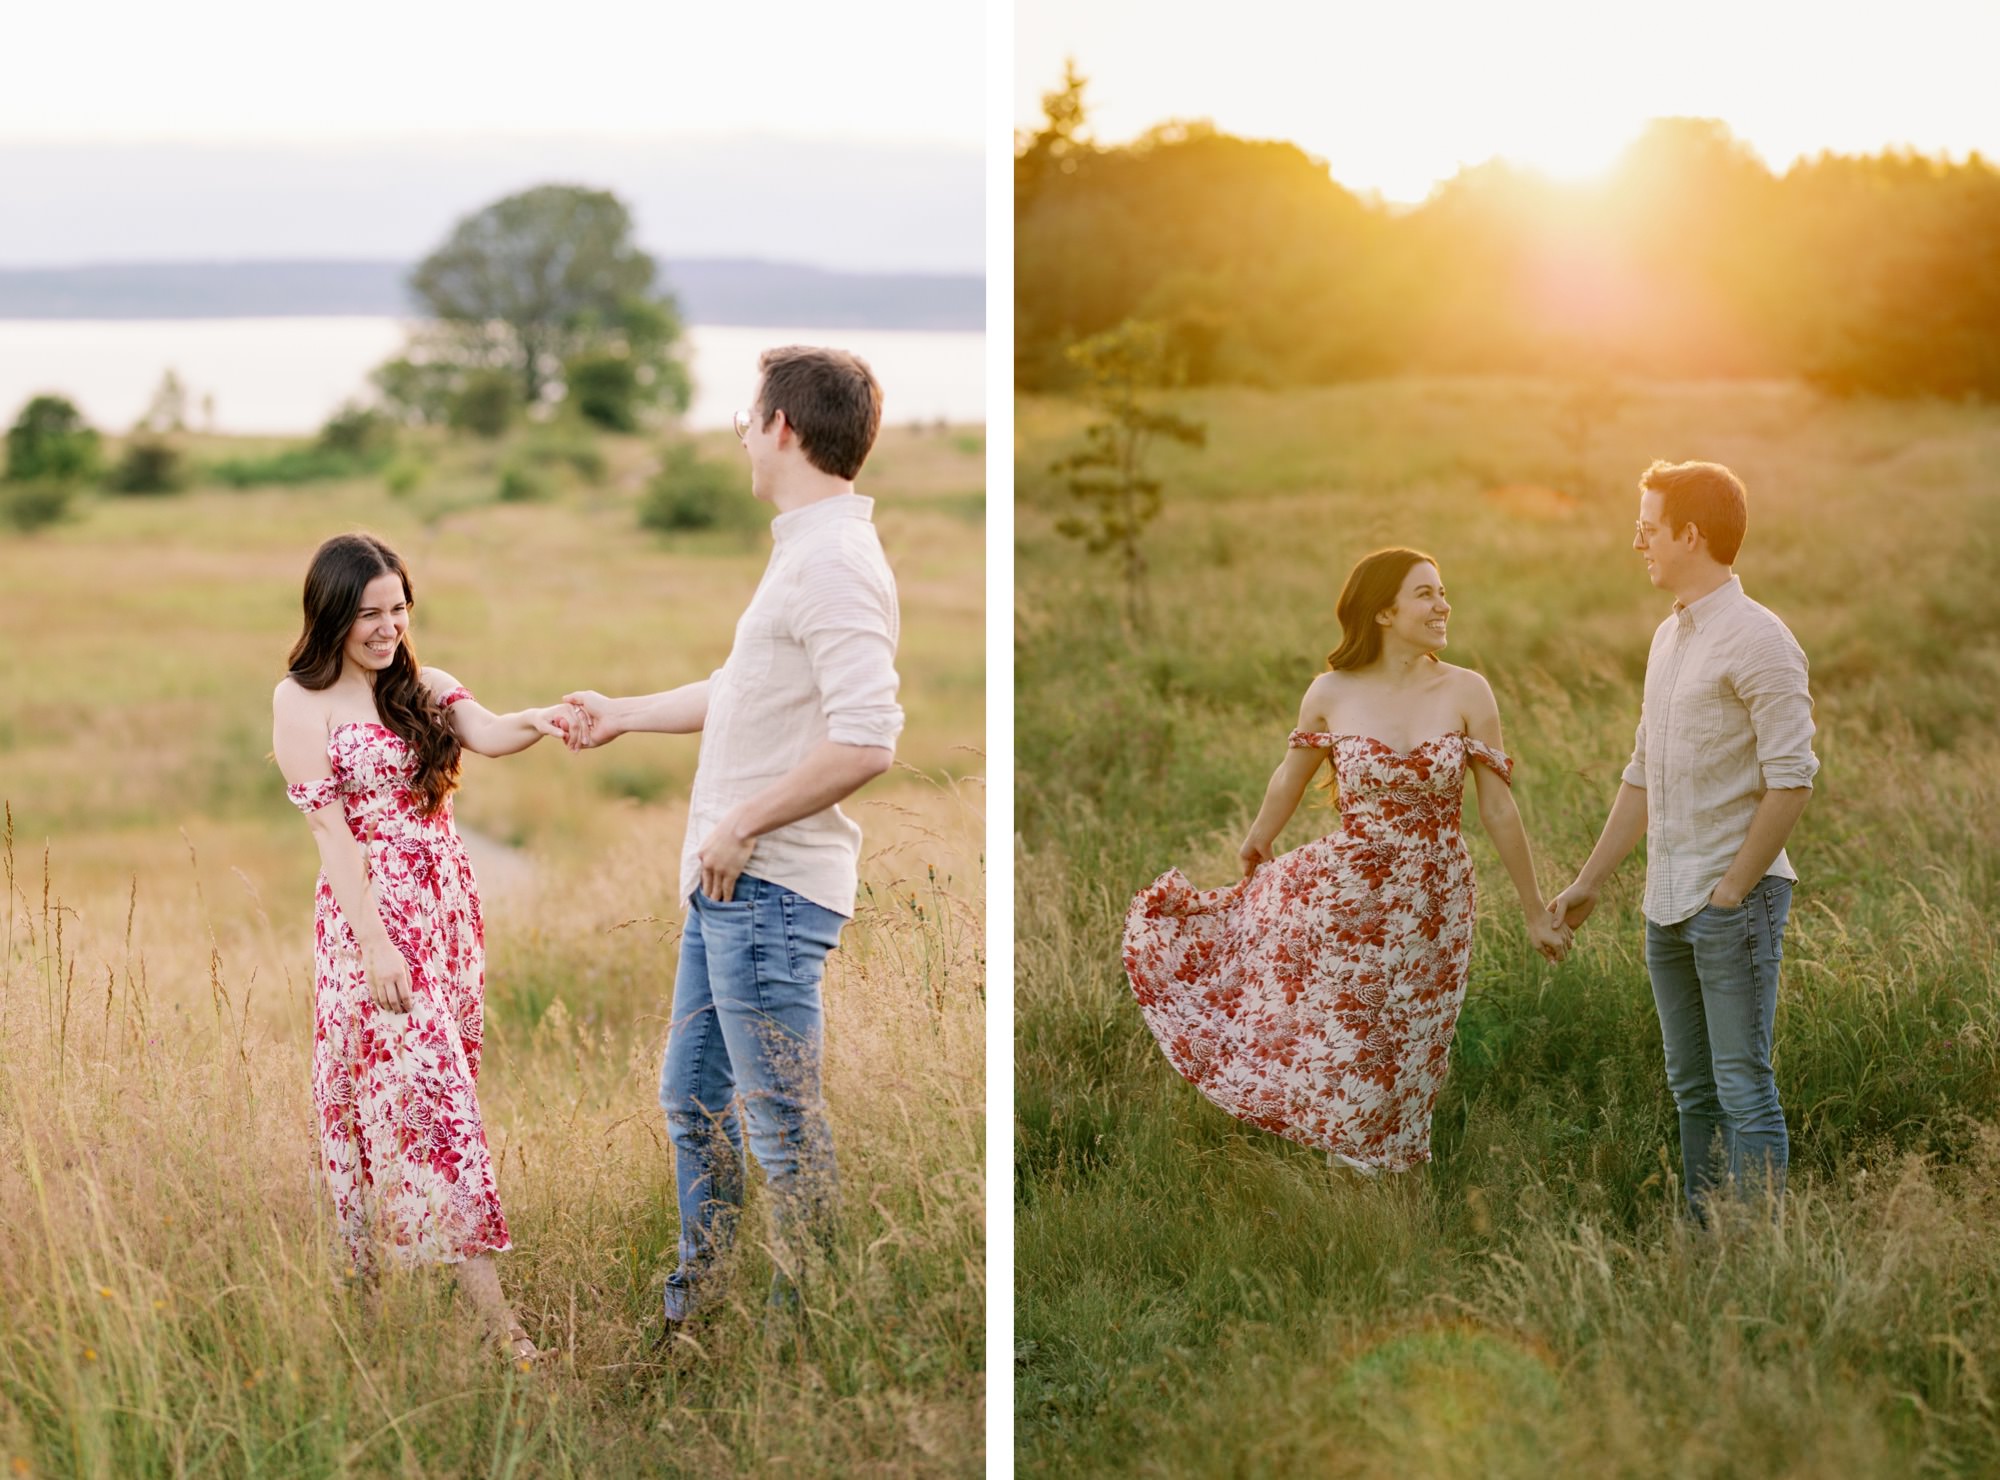 A couple holding hands and smiling in a grassy meadow, with the woman in a floral dress and the man in a light shirt.